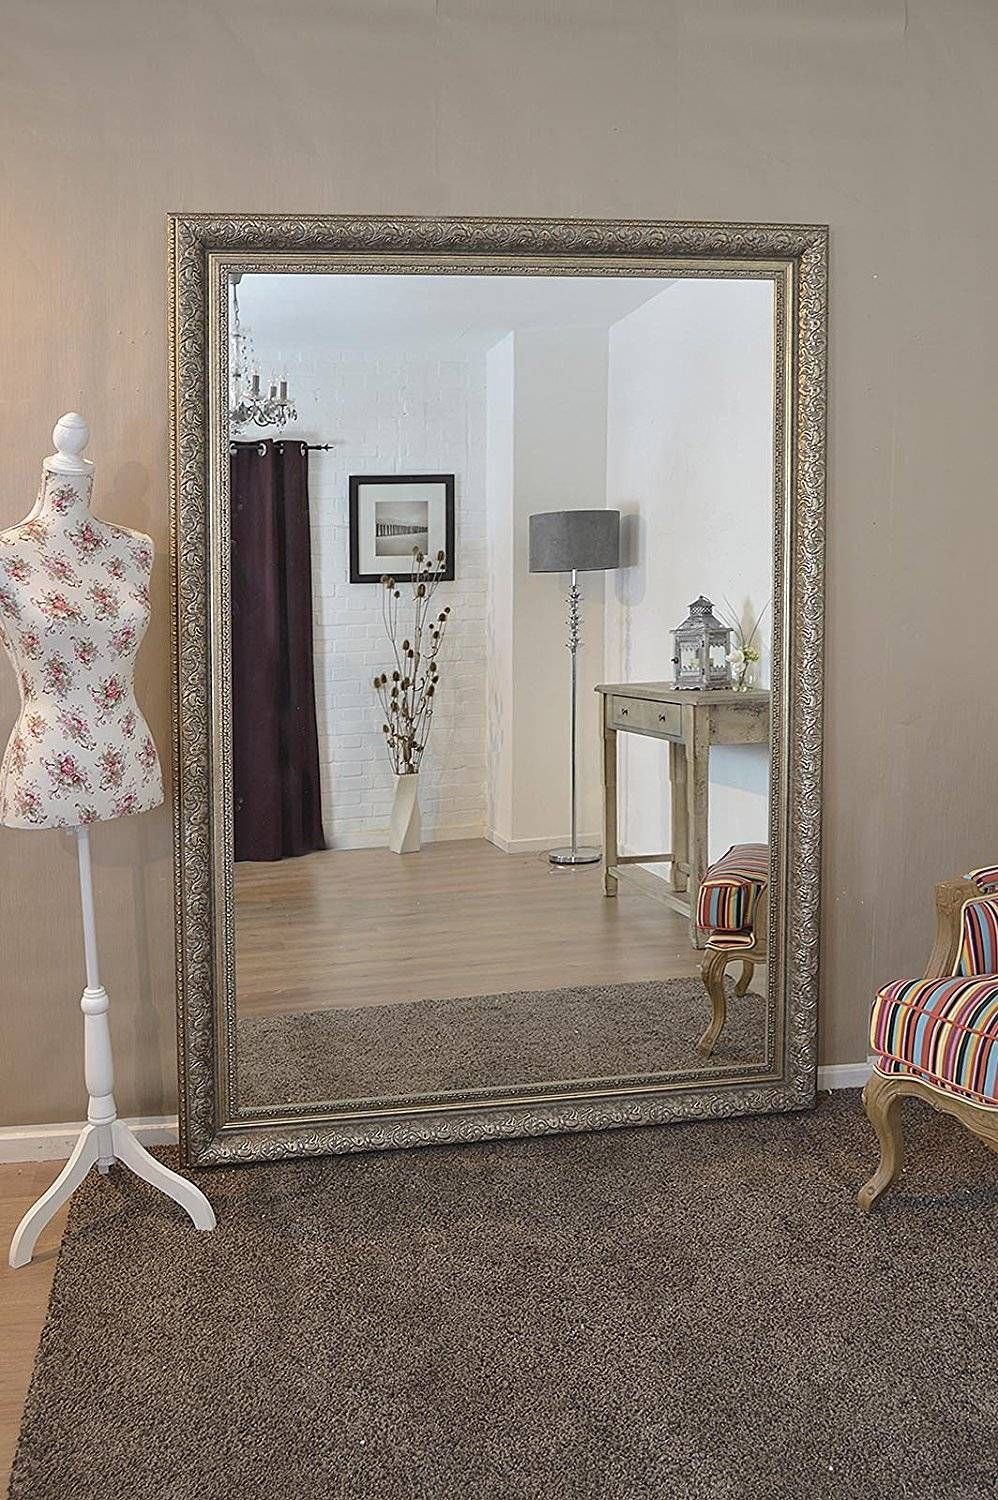 Large Silver Wall Mirror 46 Fascinating Ideas On Large Wall Within Large Ornate Silver Mirrors (View 5 of 25)